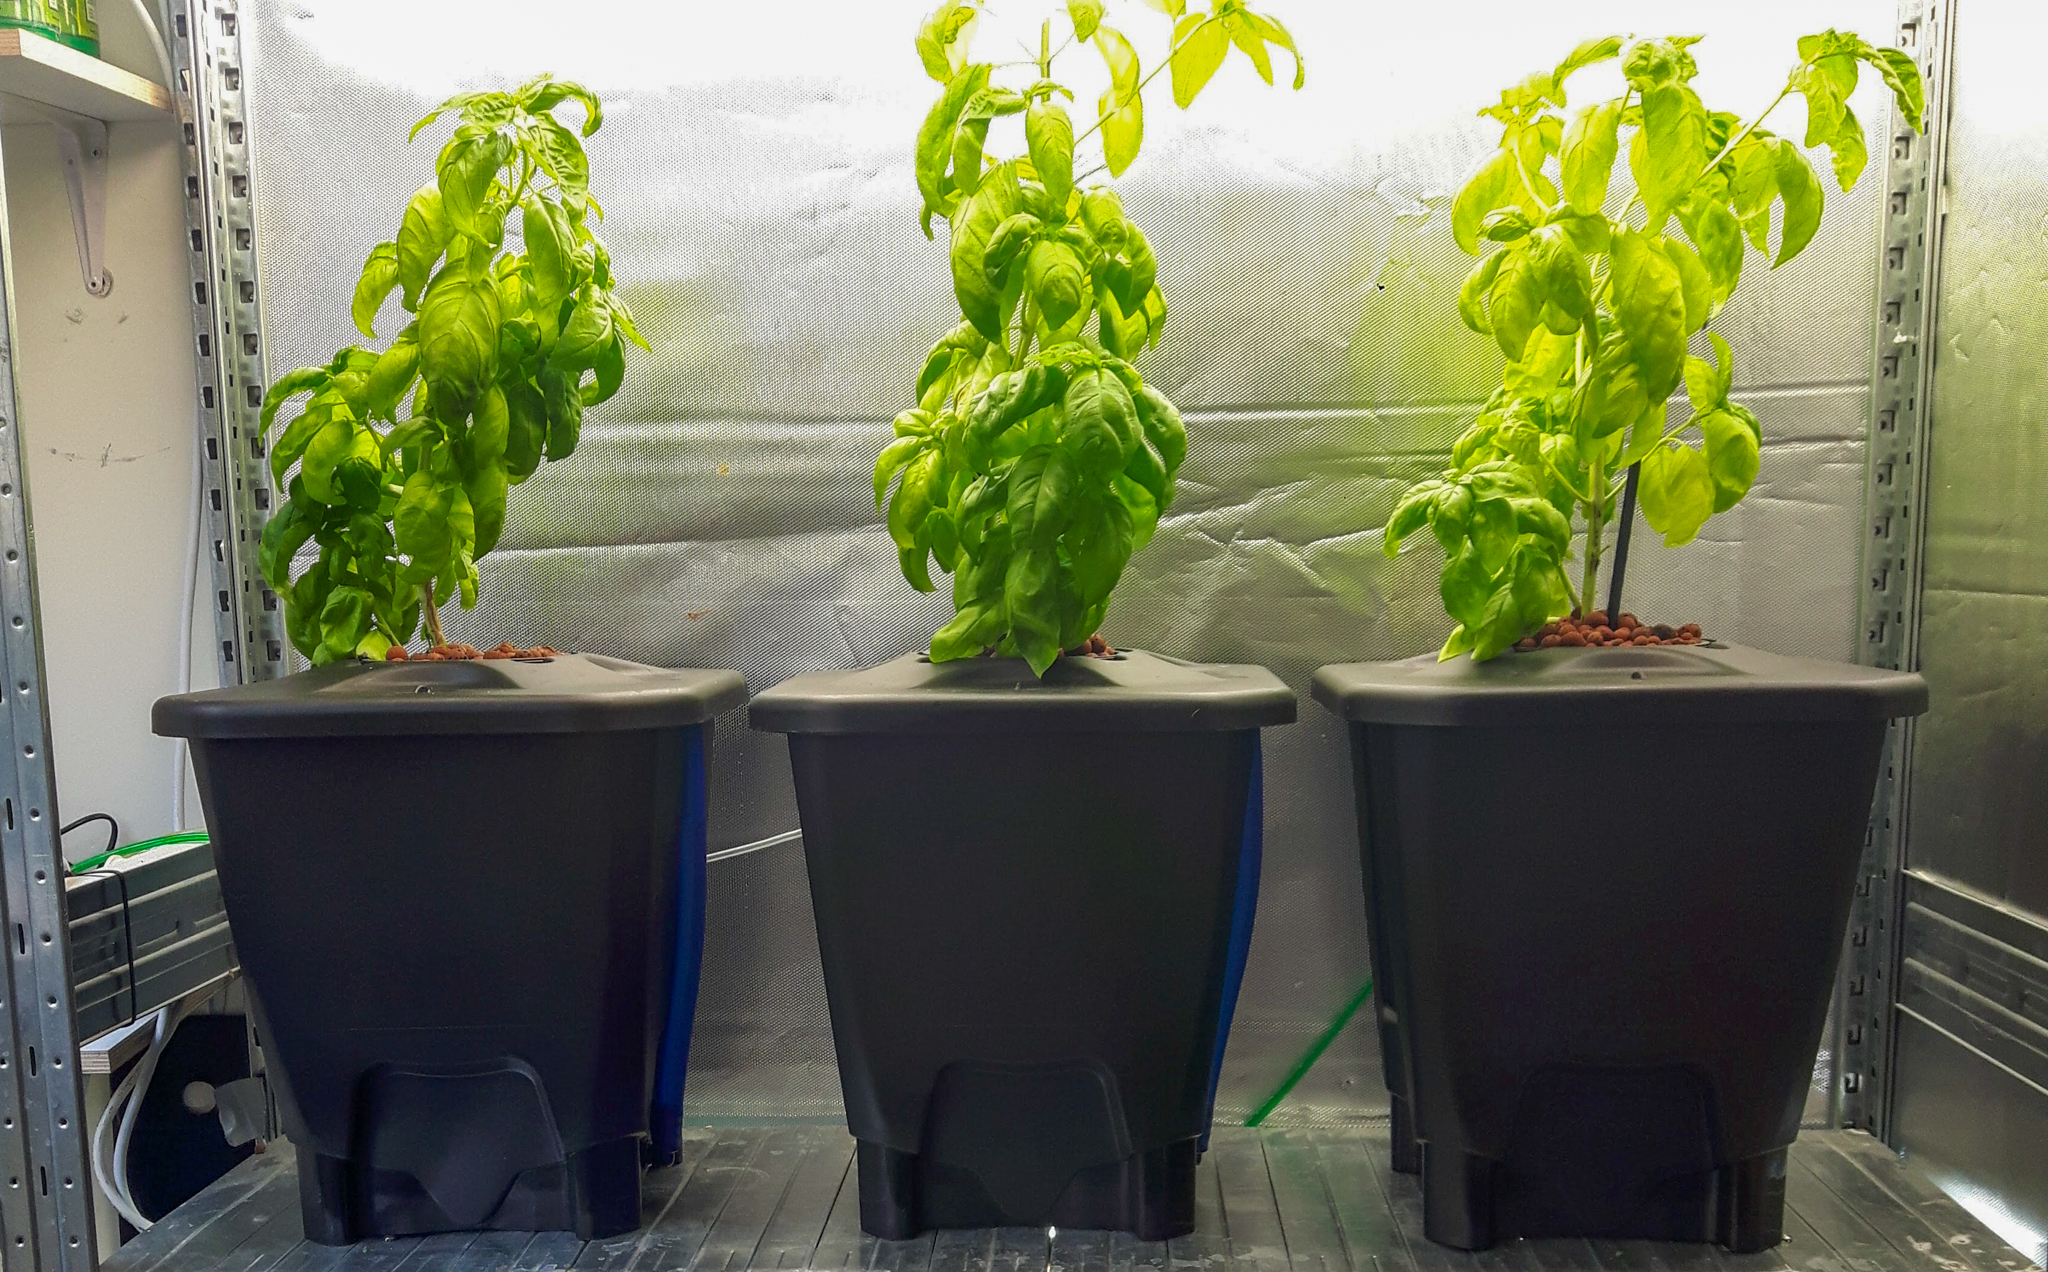 Differences Between Soft Water and hard Water for Hydroponic Growth